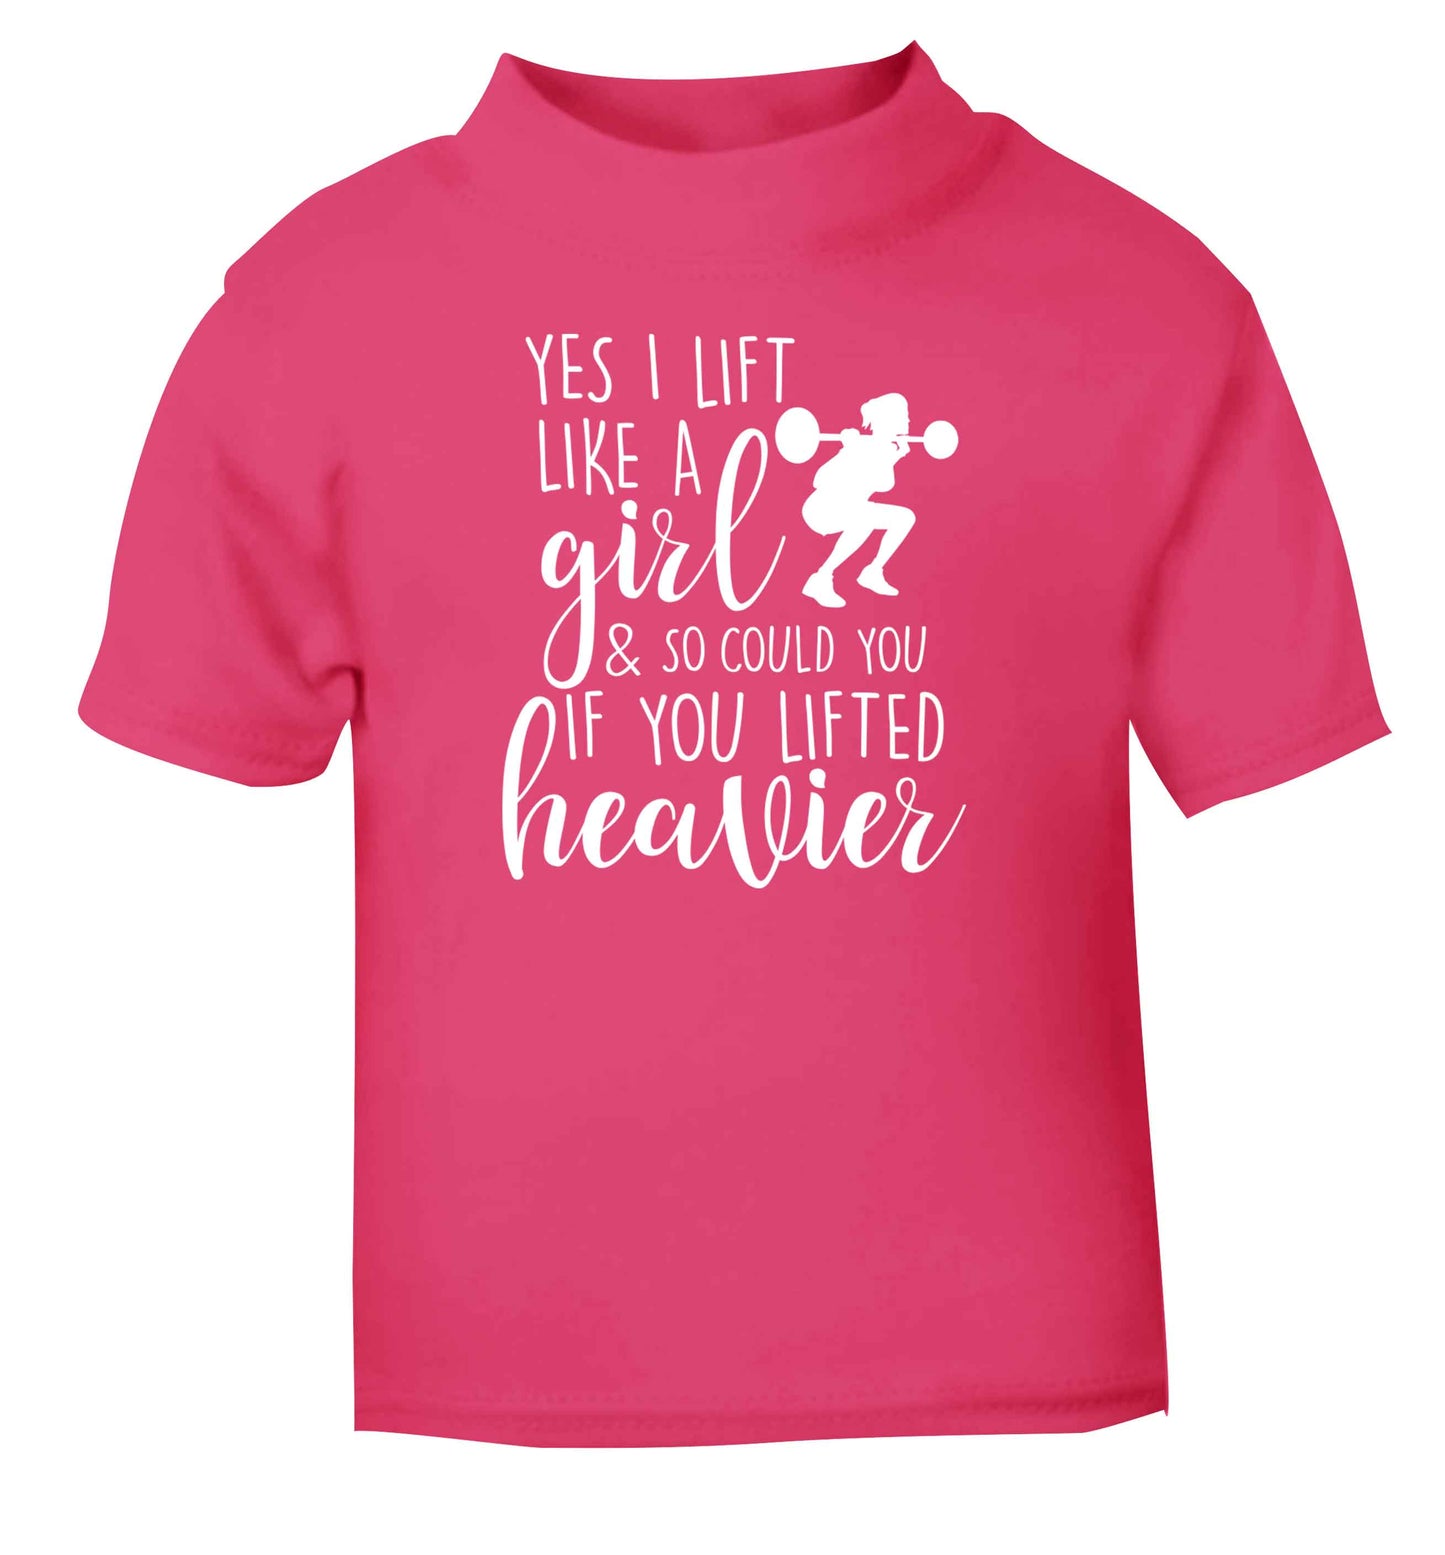 Yes I lift like a girl and so could you if you lifted heavier pink Baby Toddler Tshirt 2 Years